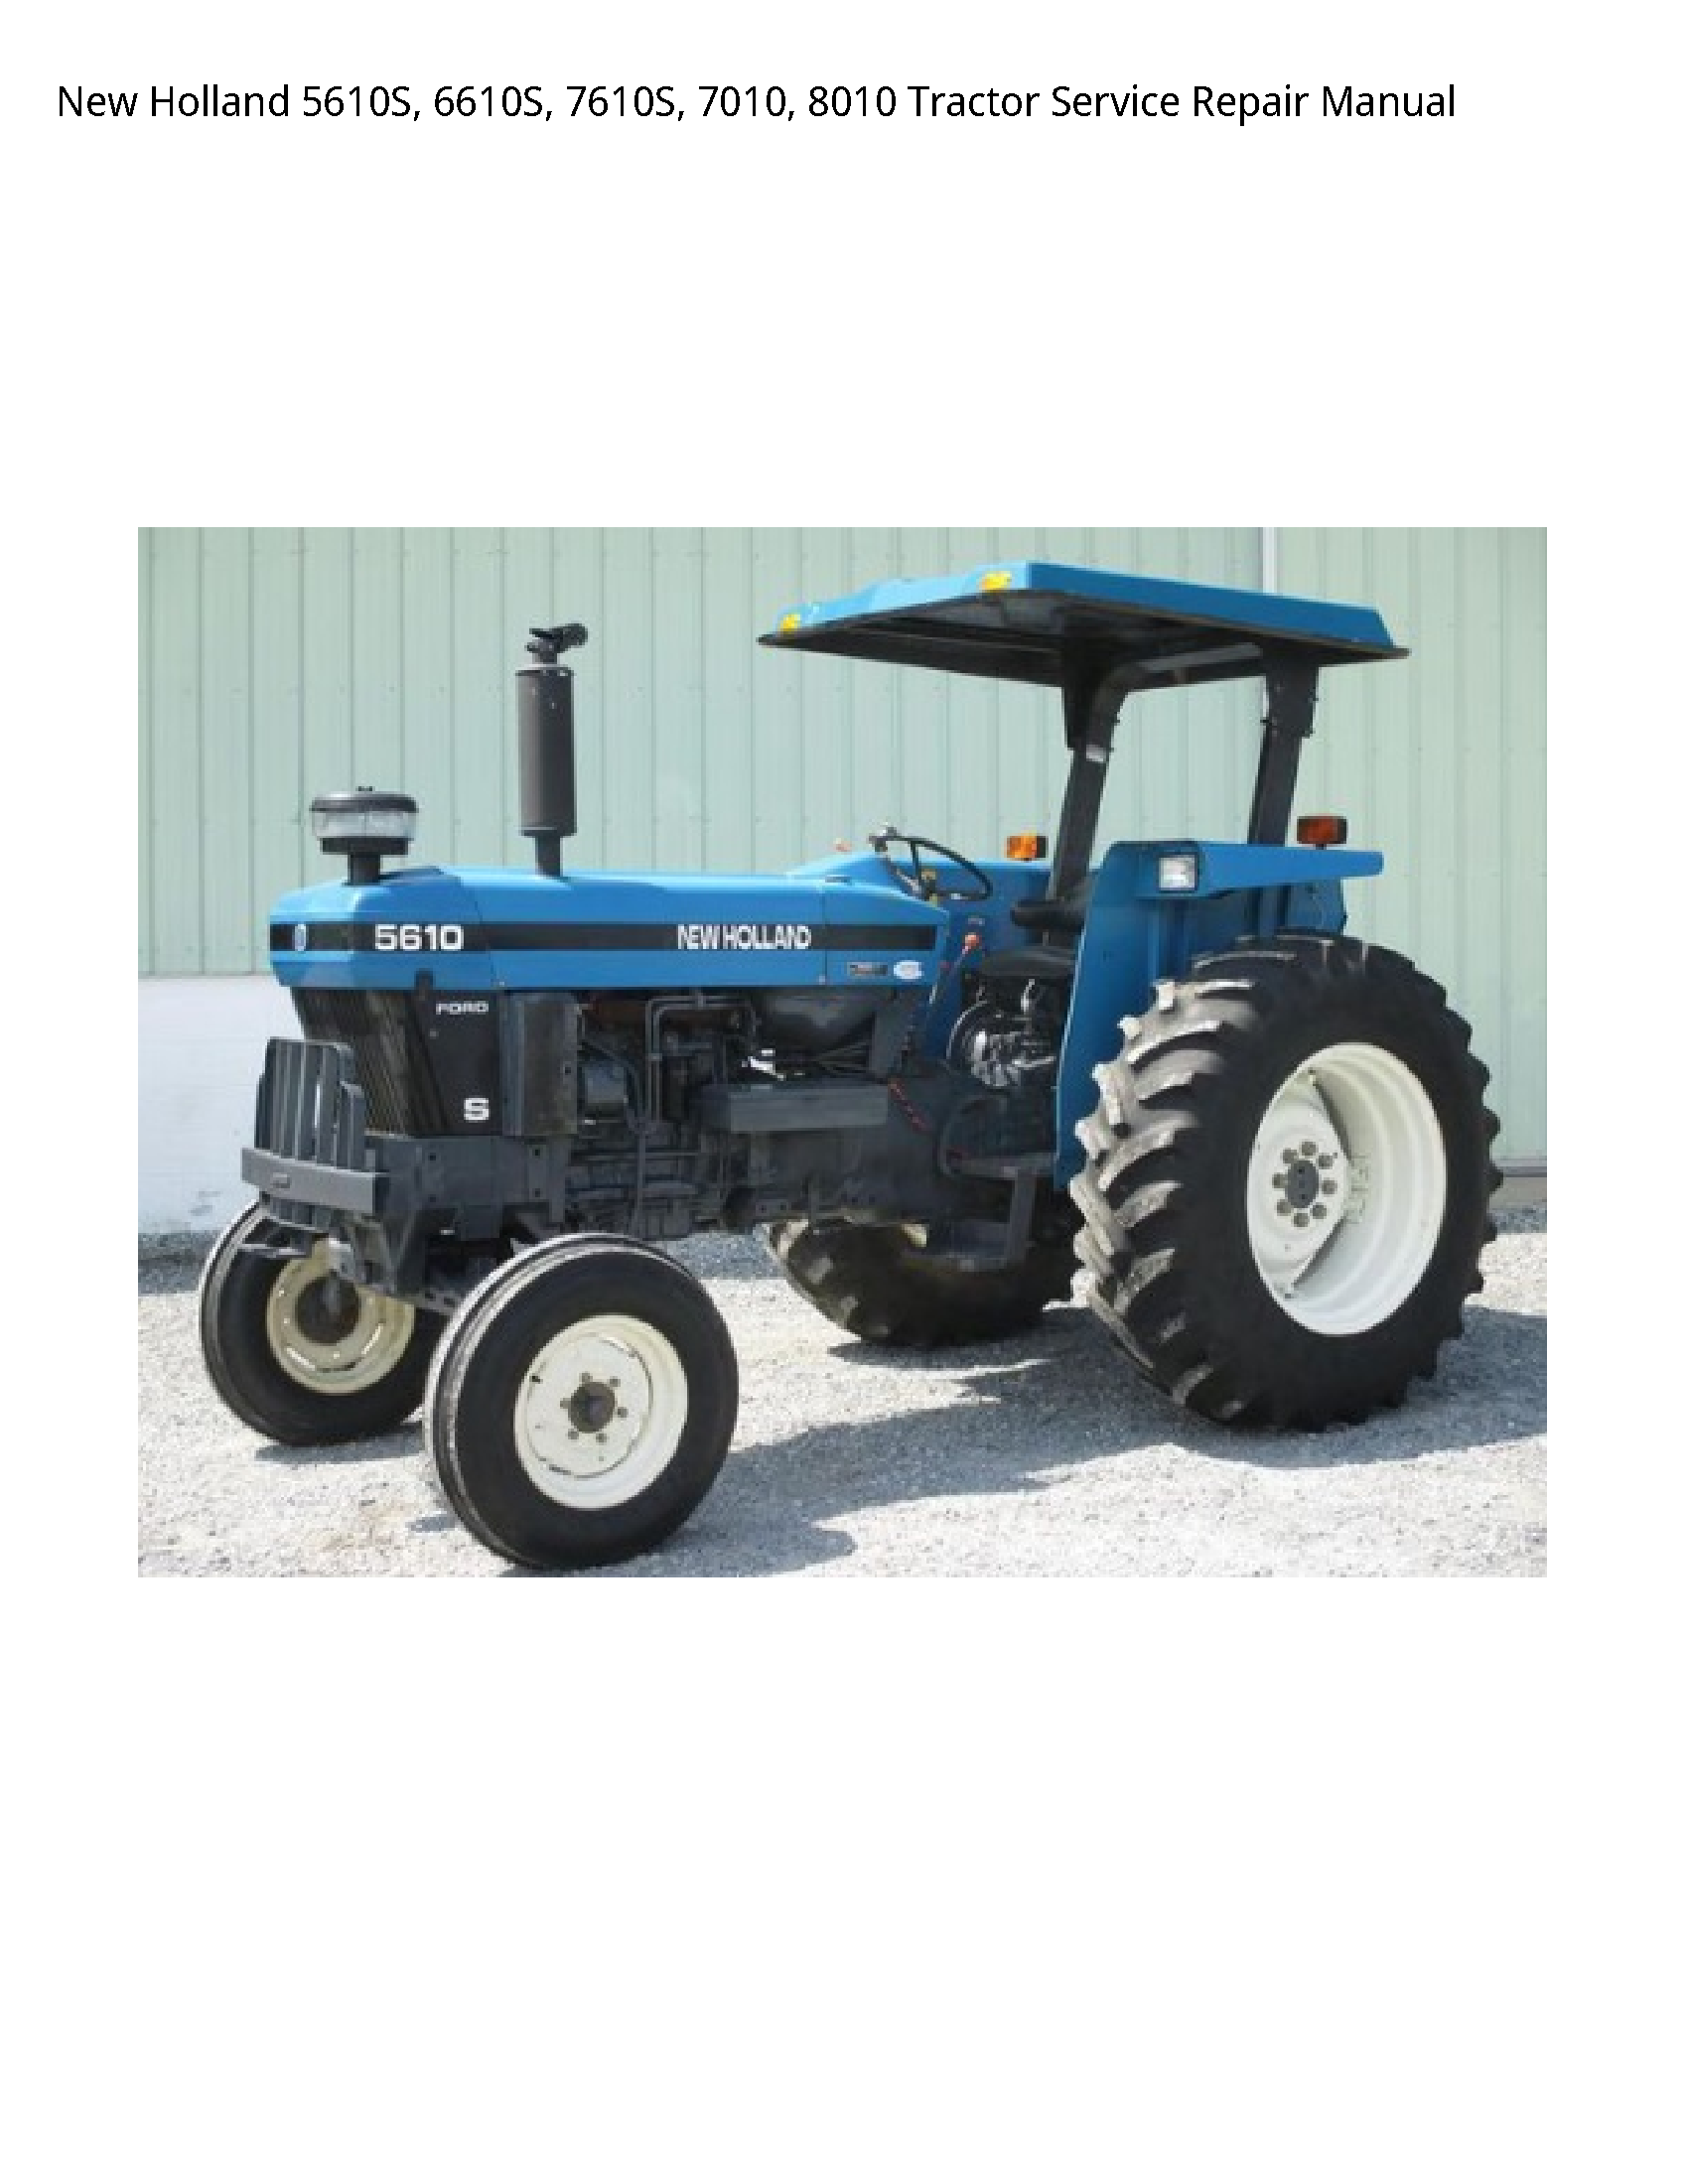 New Holland 5610S Tractor manual